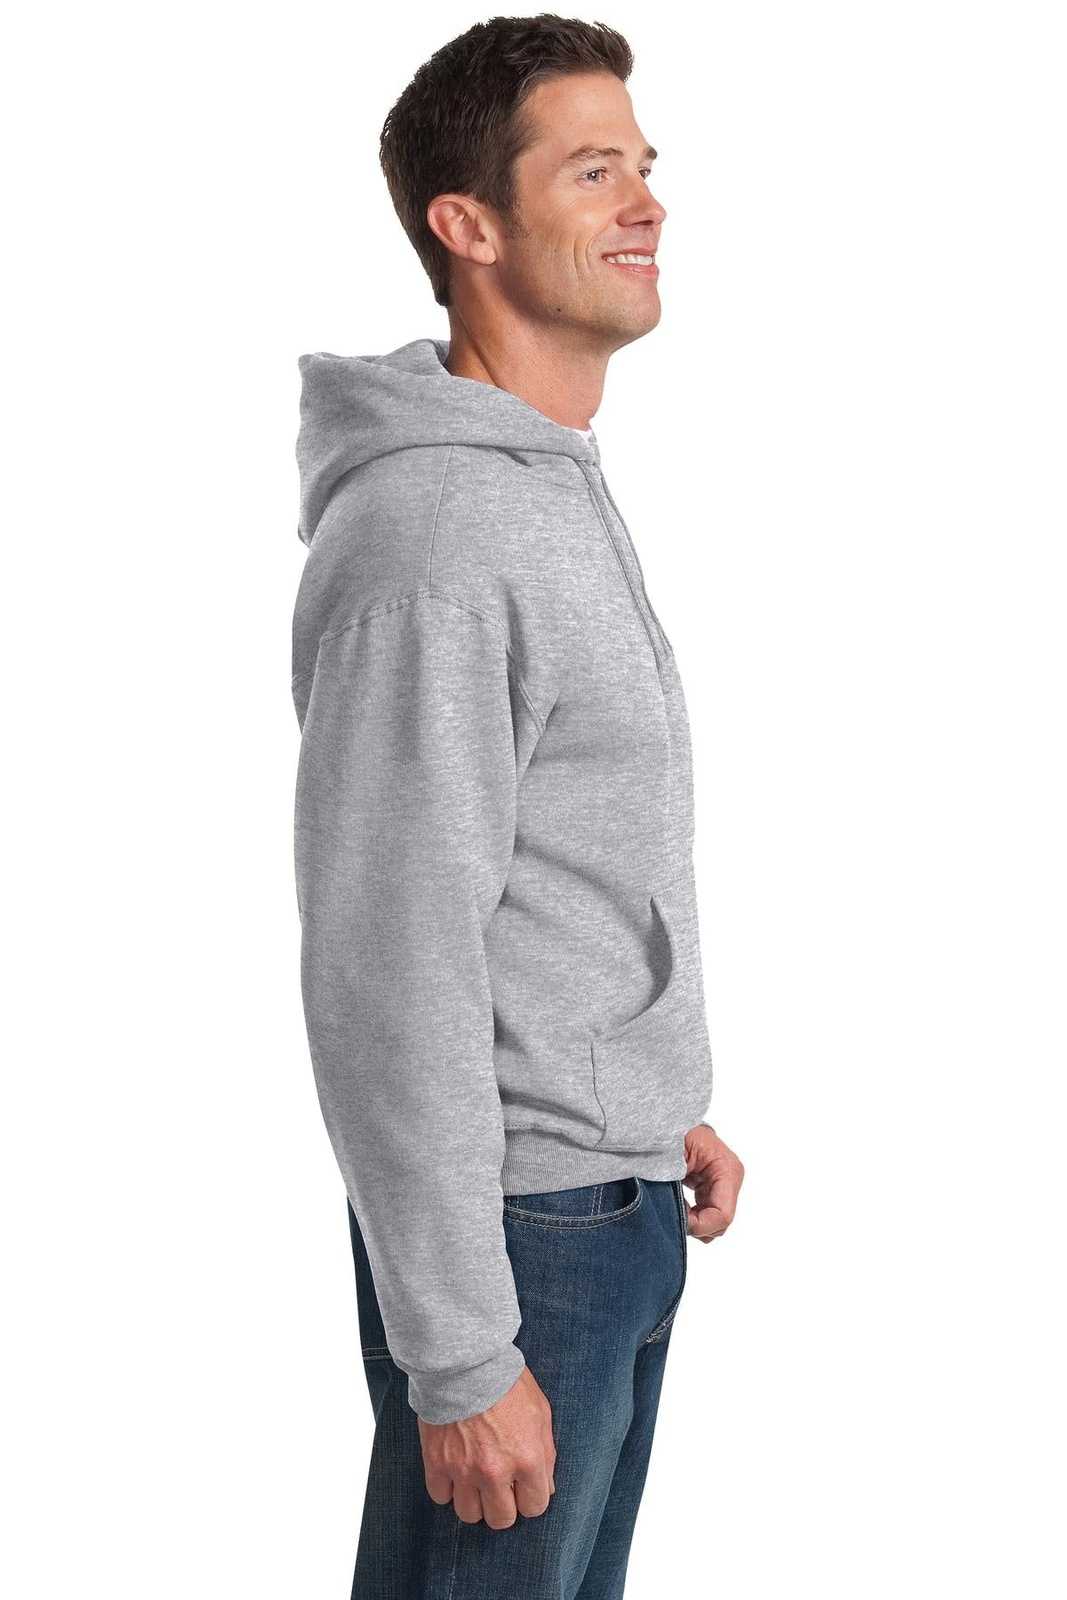 Jerzees 996MR NuBlend Pullover Hooded Sweatshirt - Athletic Heather - HIT a Double